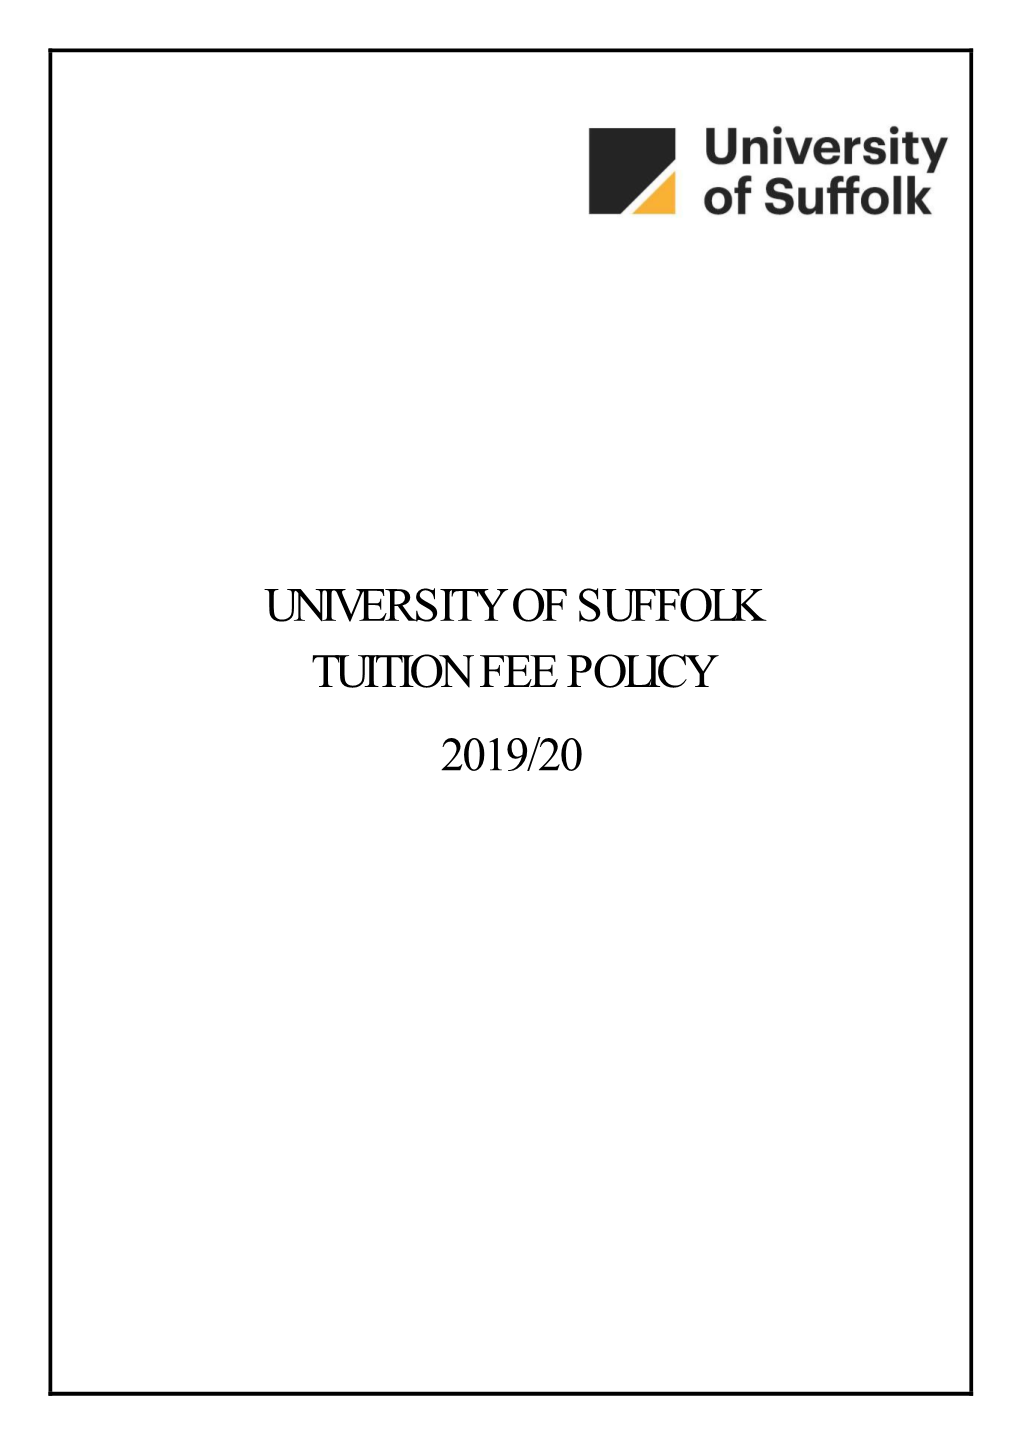 University of Suffolk Tuition Fee Policy 2019/20